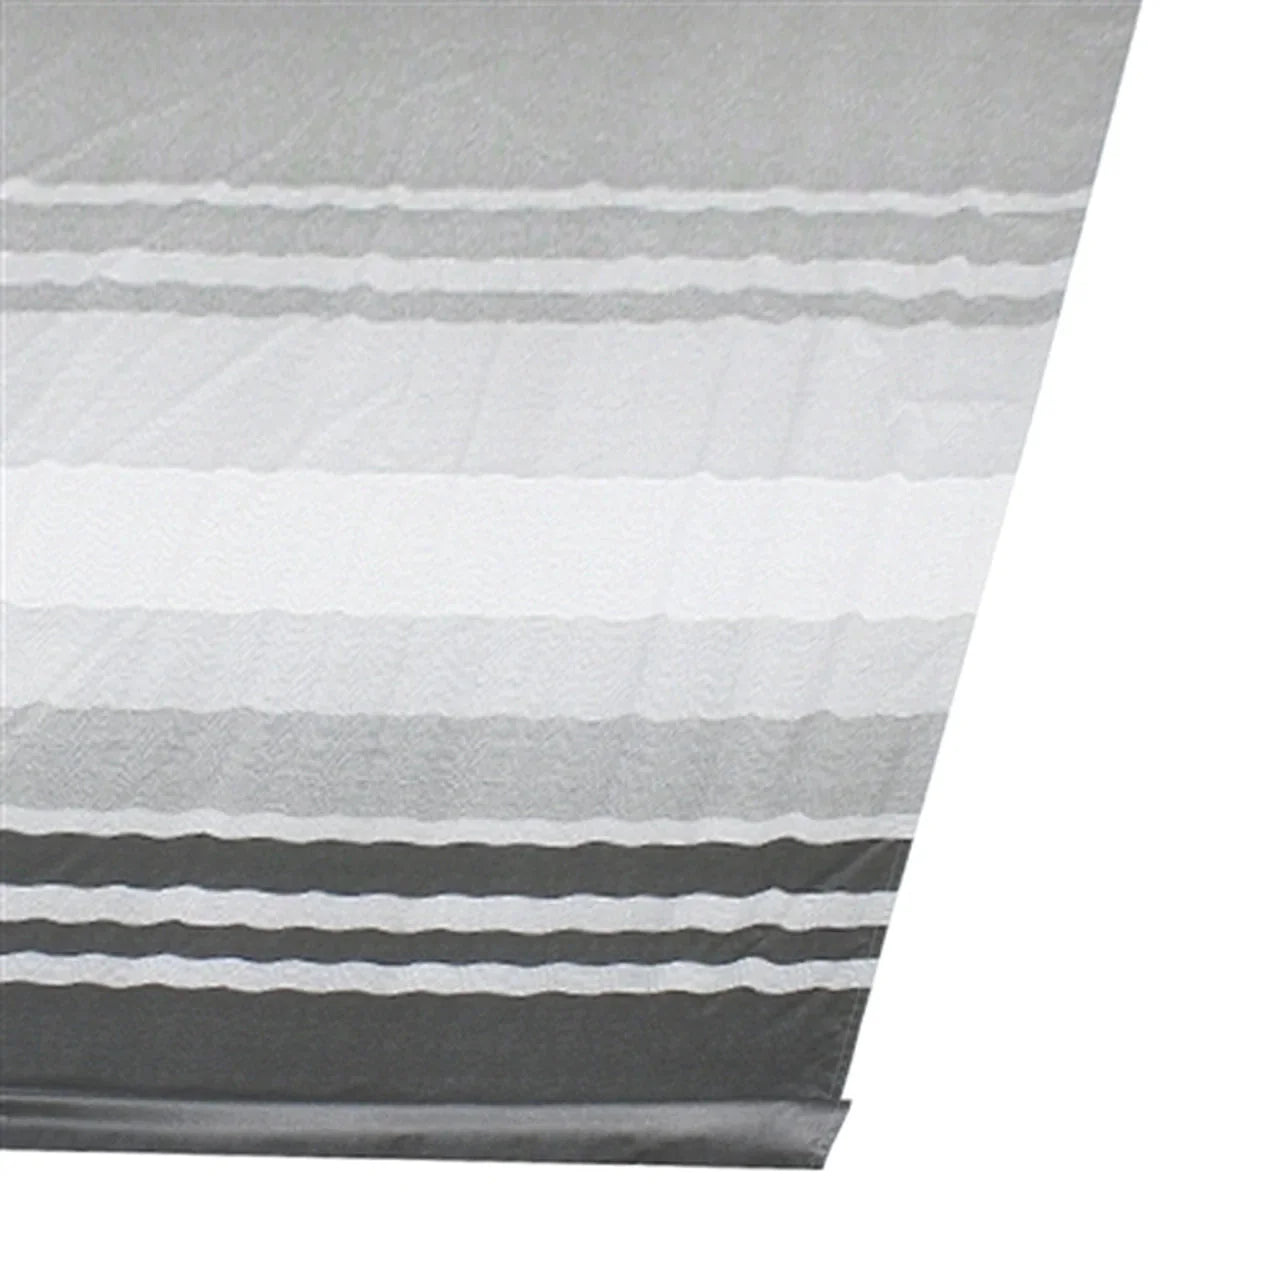 Aleko RV Awning Fabric Replacement - 12 X 8 ft (3.7 x 2.4 m)